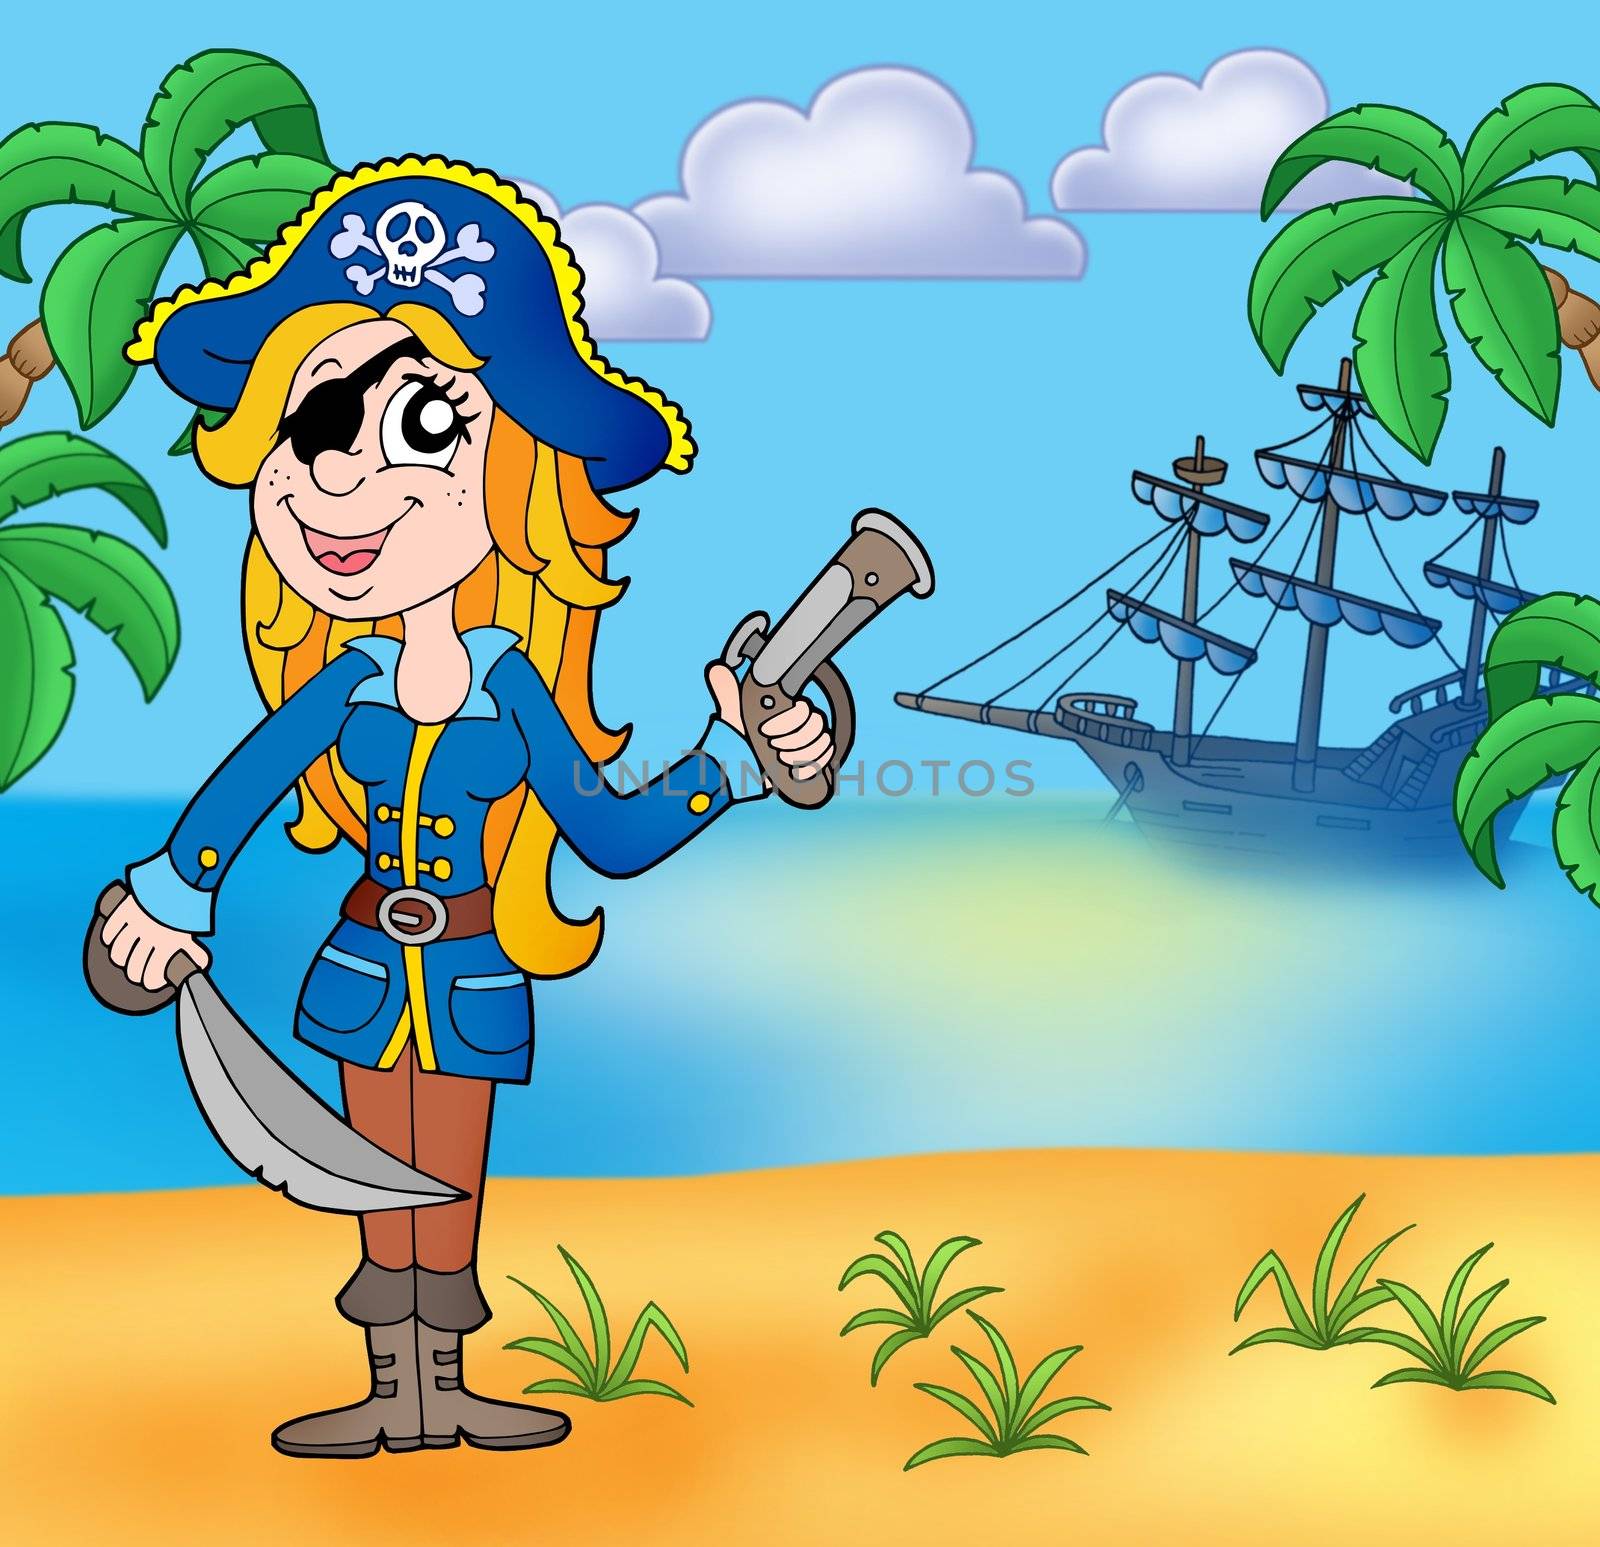 Pirate girl on beach 3 - color illustration.